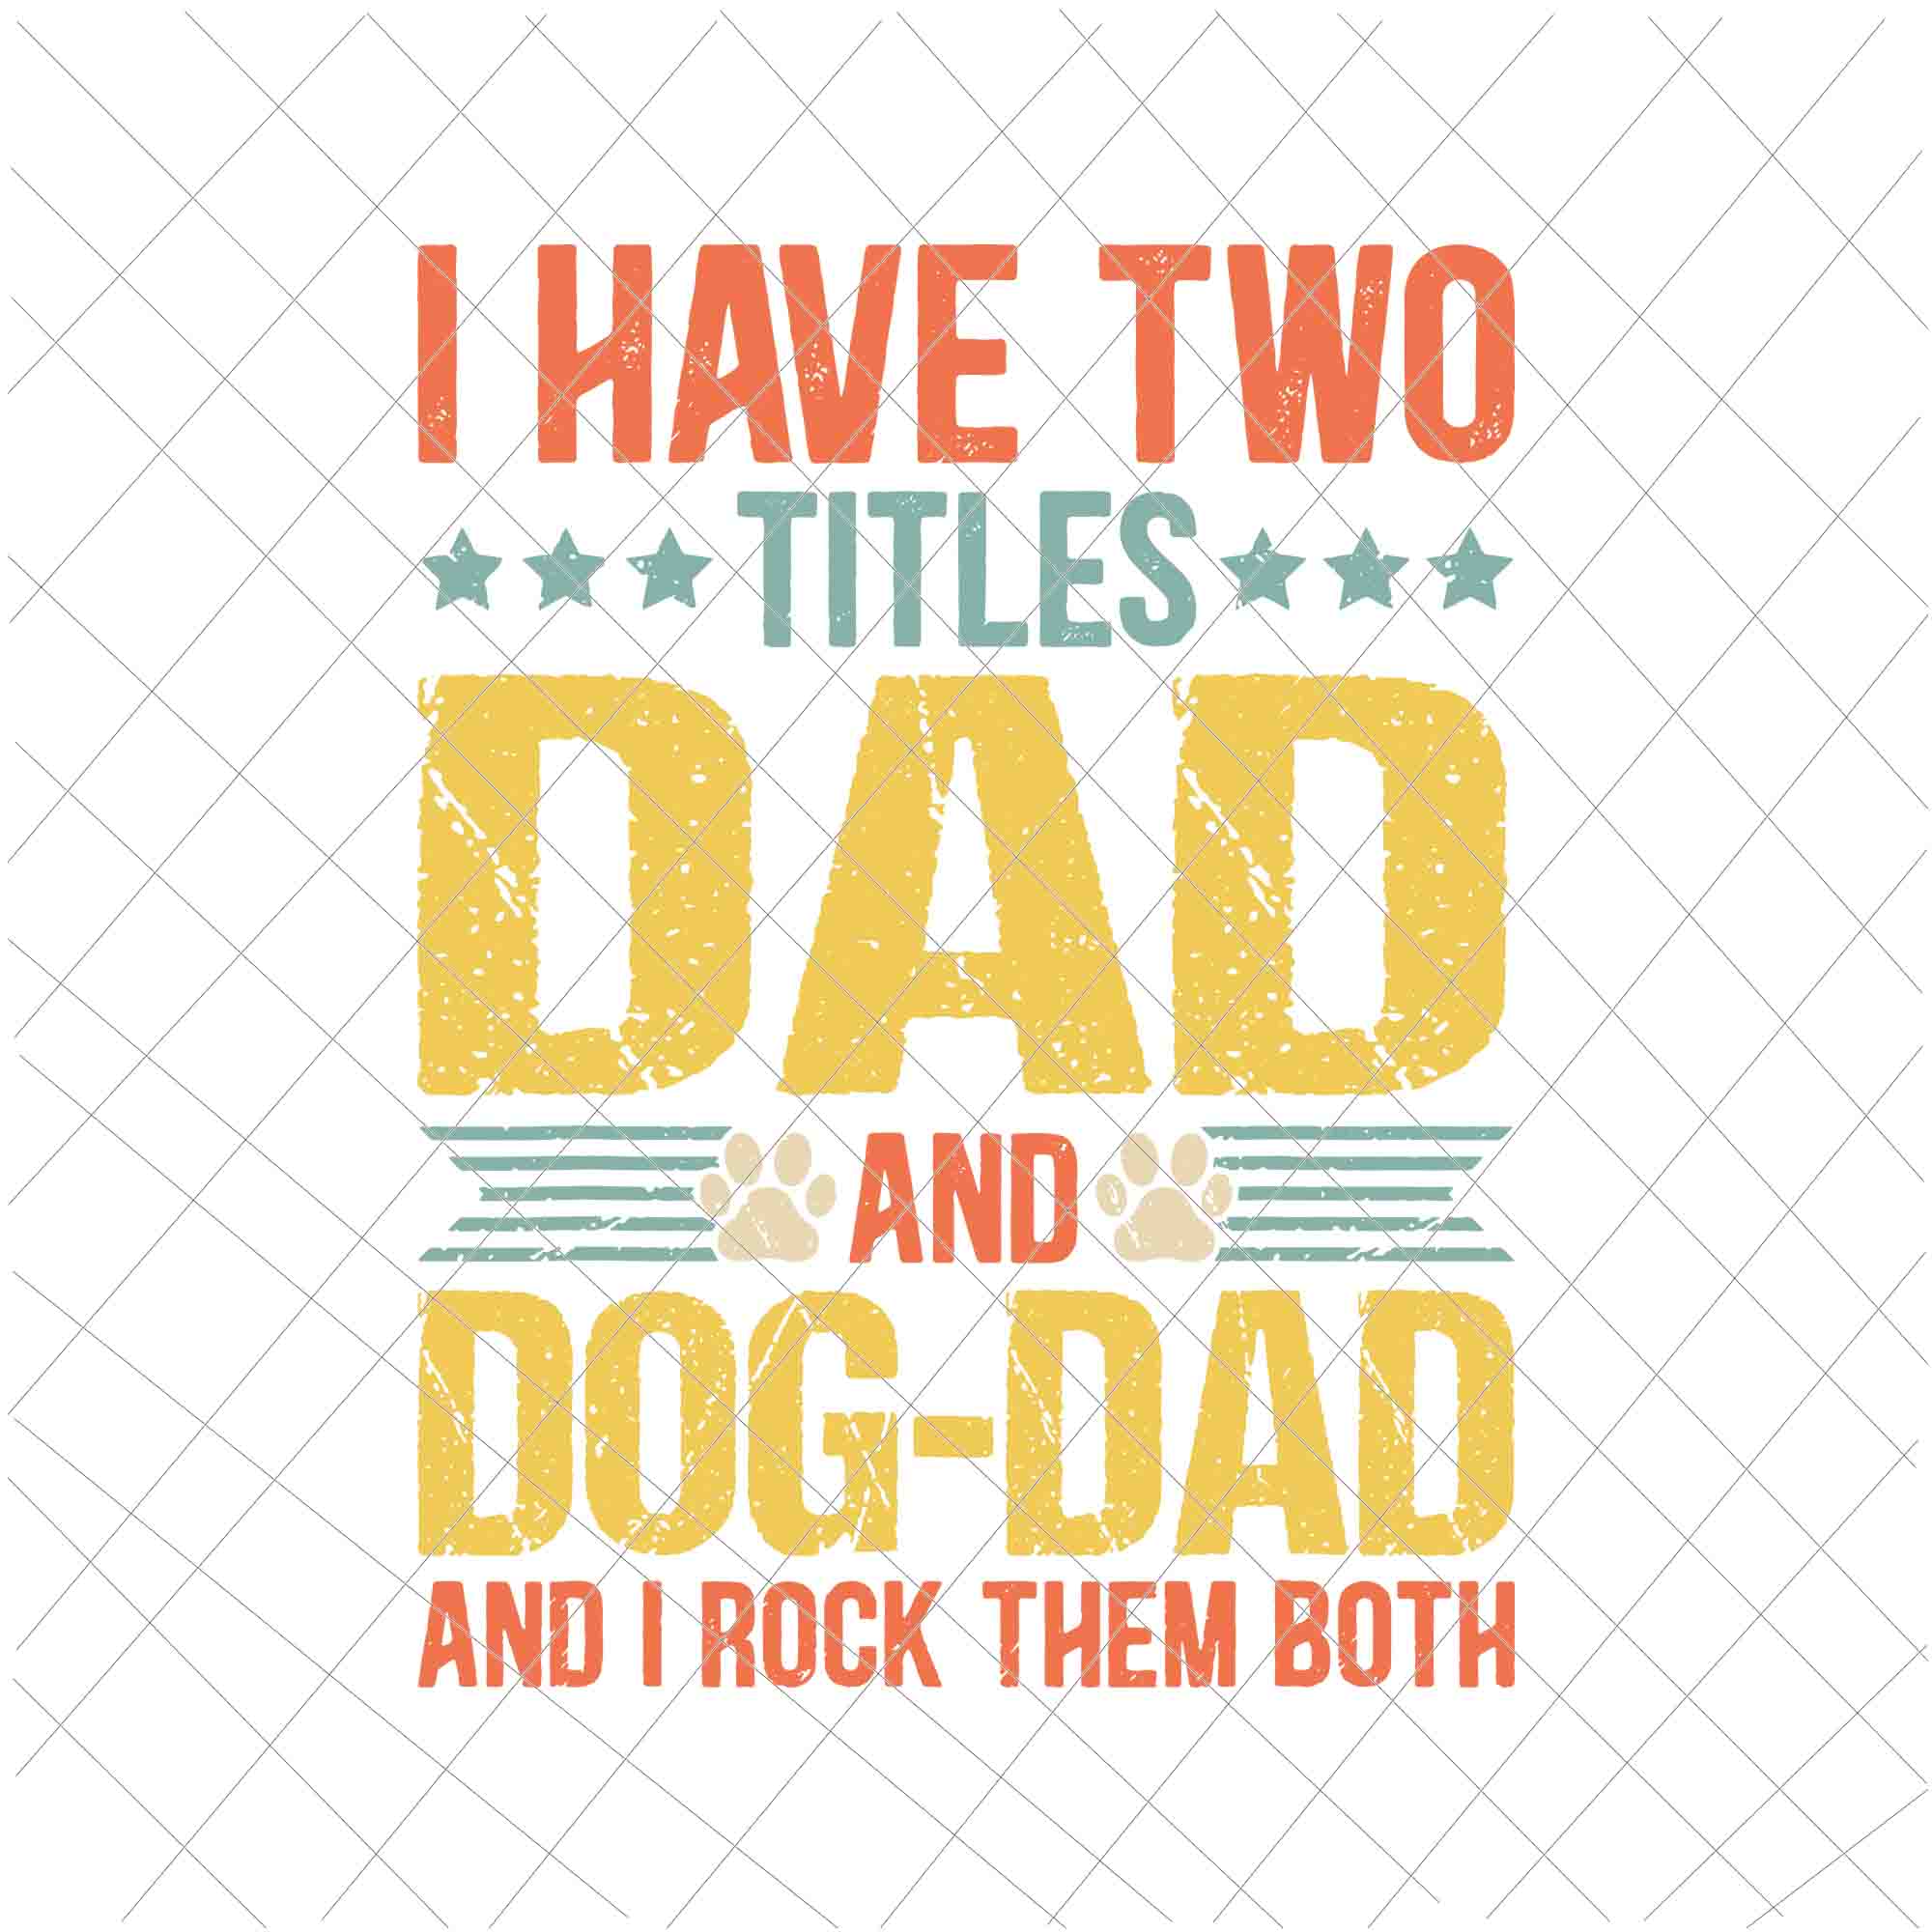 I Have Two Titles Dad And Dog Dad Svg, Dog Lover Dad Funny Puppy Father Svg, Quote Fathers Day Saying Svg